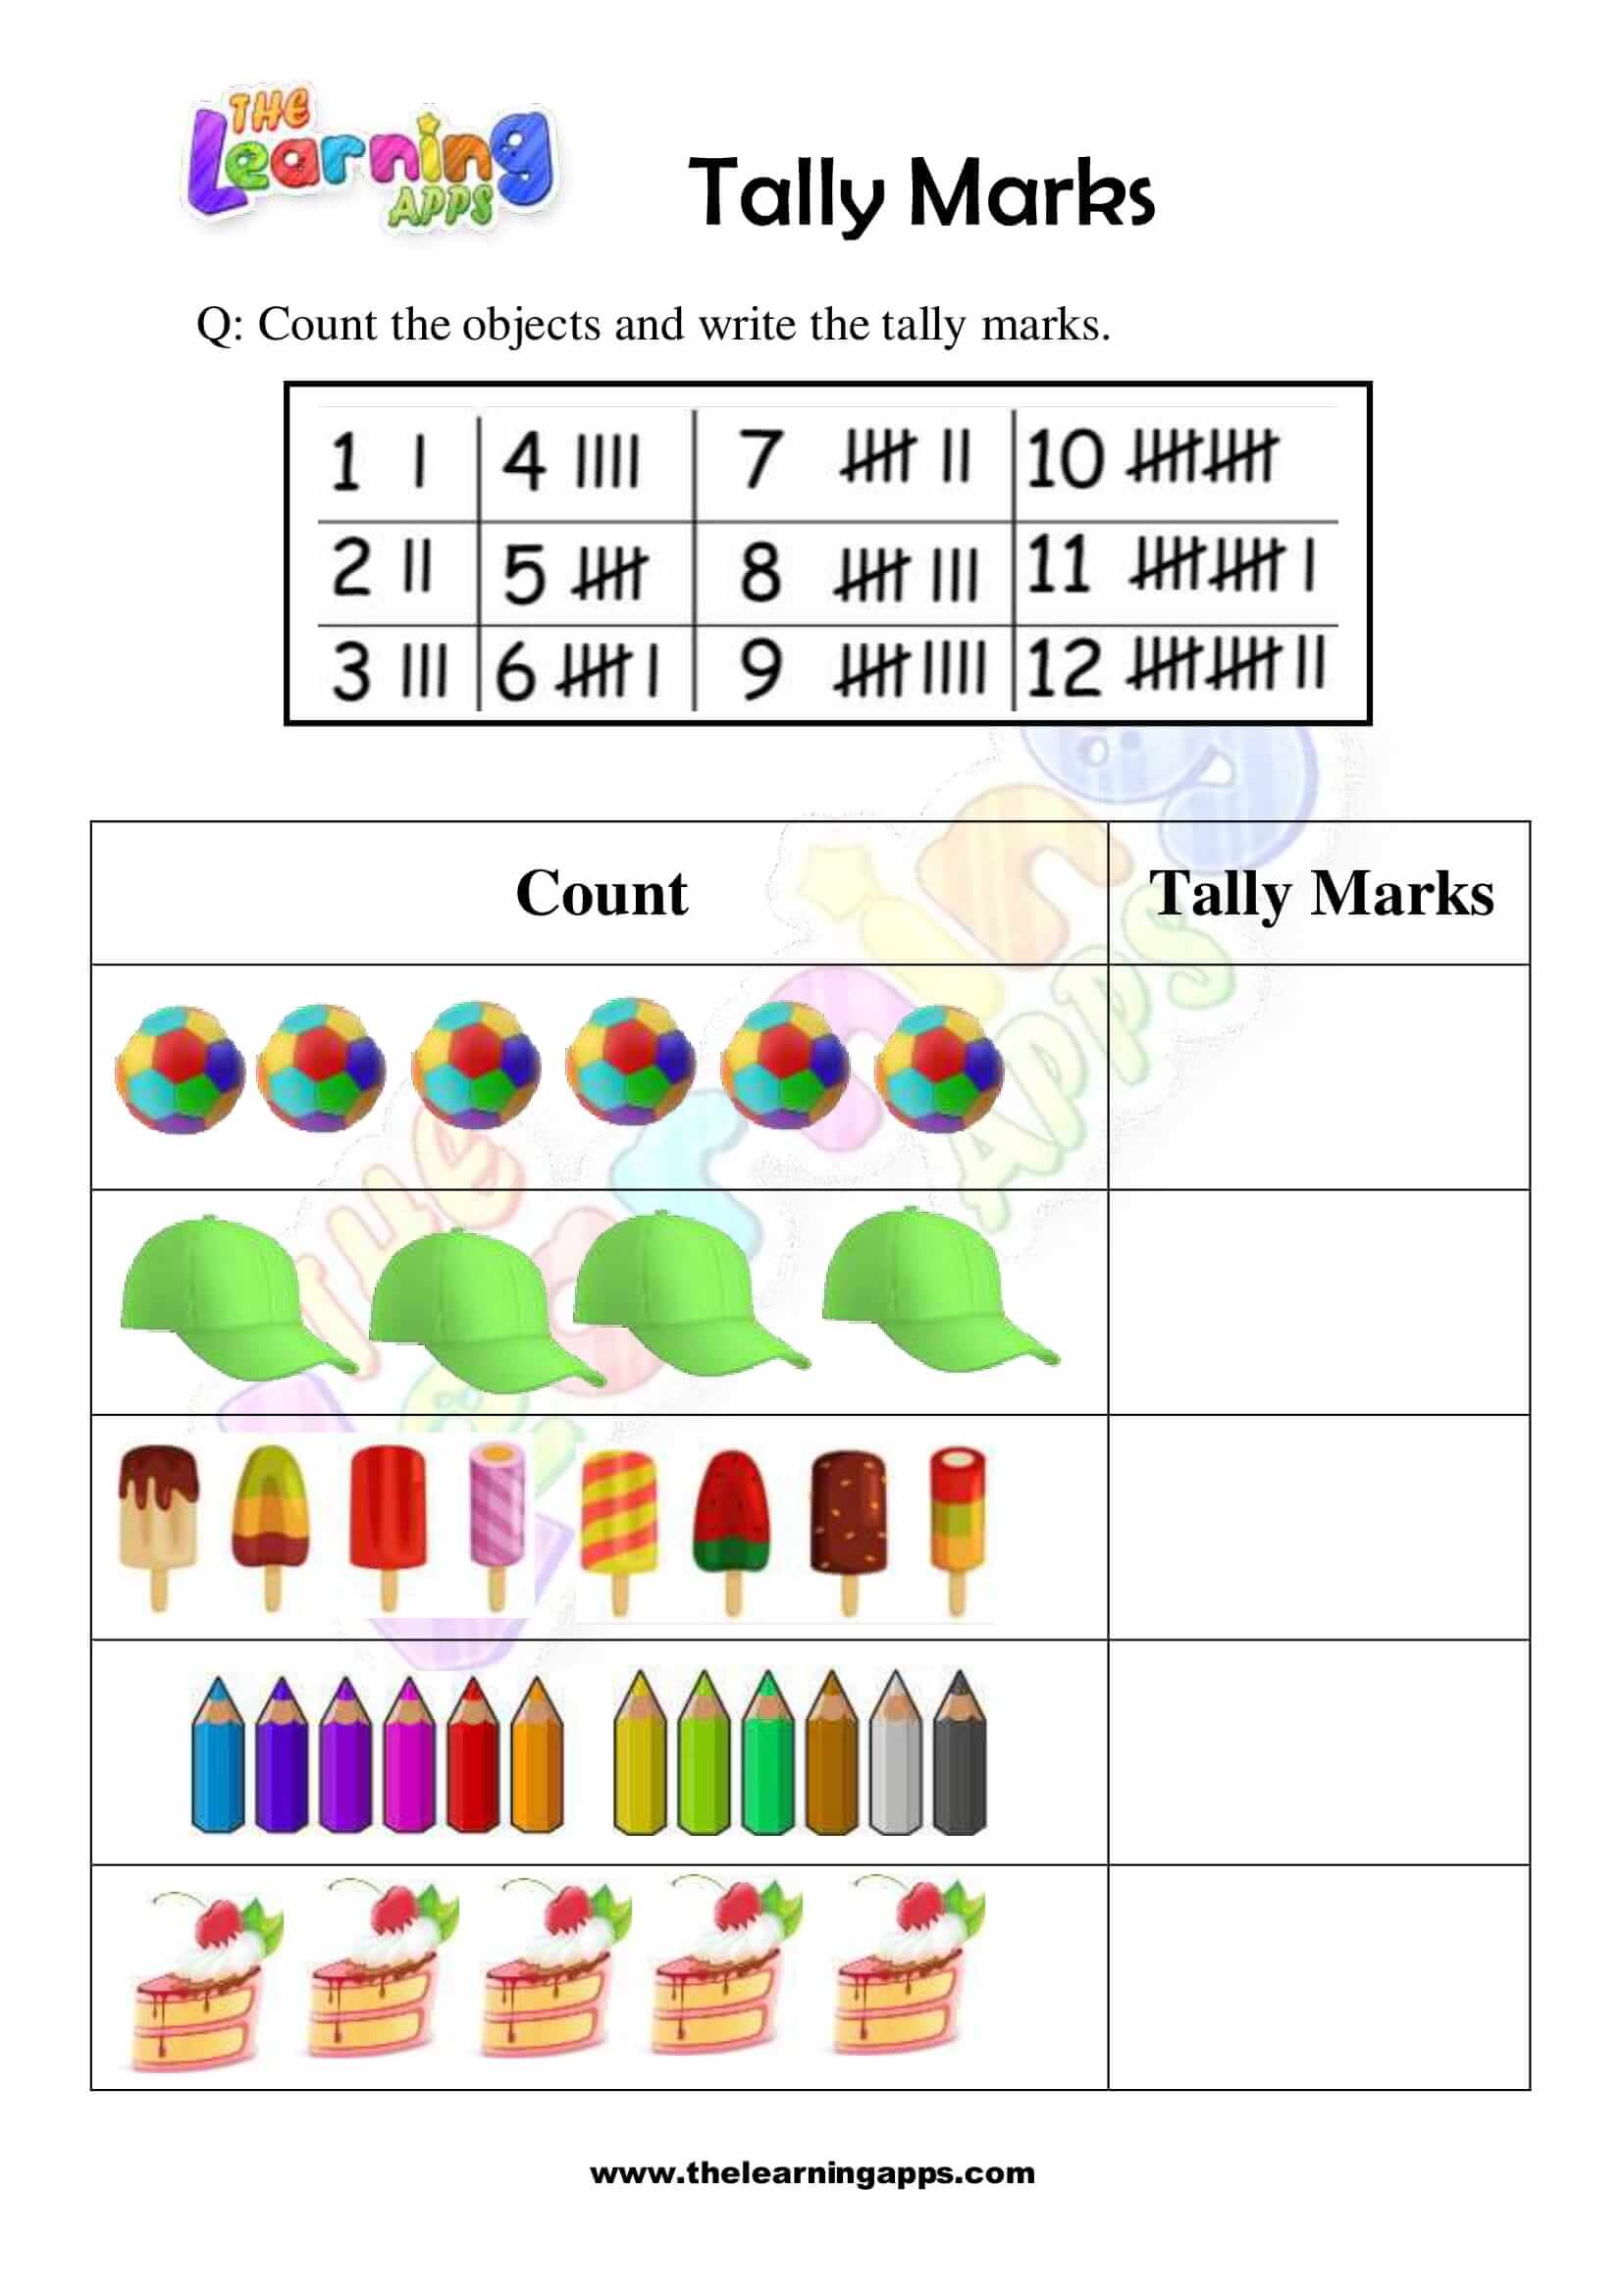 Kindergarten Math Worksheets : Numbers 1-10 Tally Marks - Etsy